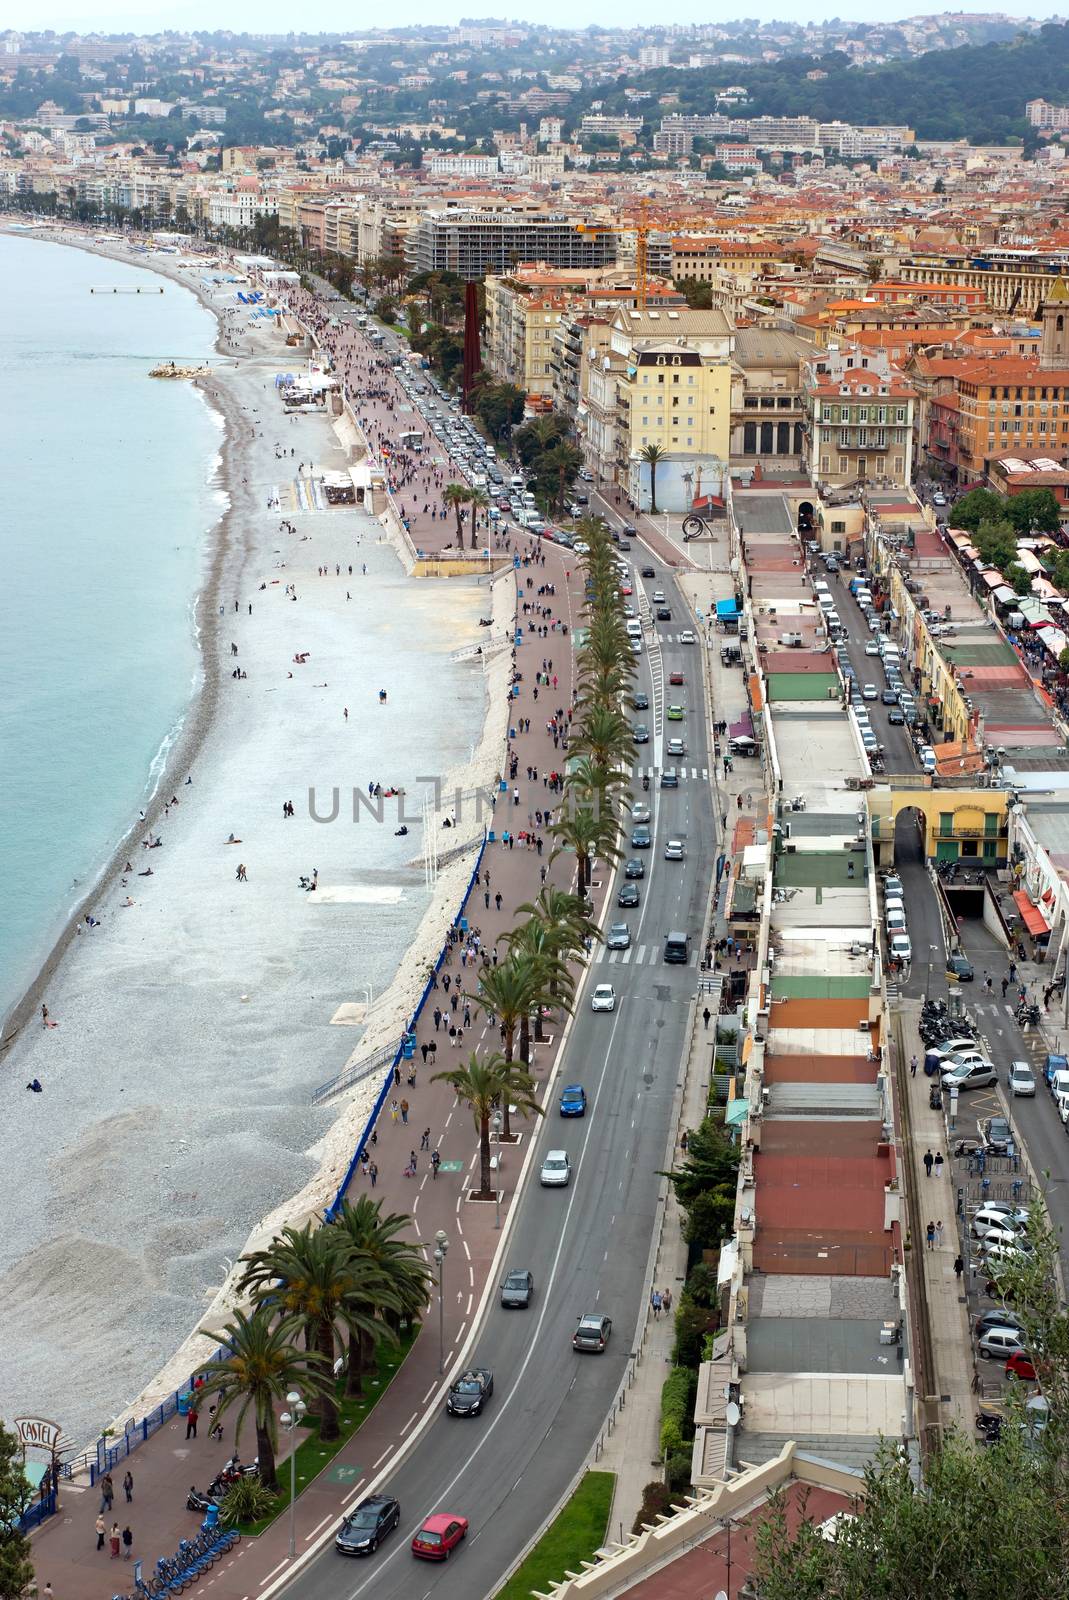 NICE, FRANCE - MAY 5: Promenade des Anglais from above on May 5, 2013 in Nice, France. It is a symbol of the Cote d'Azur and was built in 1830 at the expense of the British colony.

Nice, France - May 05, 2013: Promenade des Anglais from above. Promenade des Anglais is a symbol of the Cote d'Azur and was built in 1830 at the expense of the British colony. People are walking along promenade.